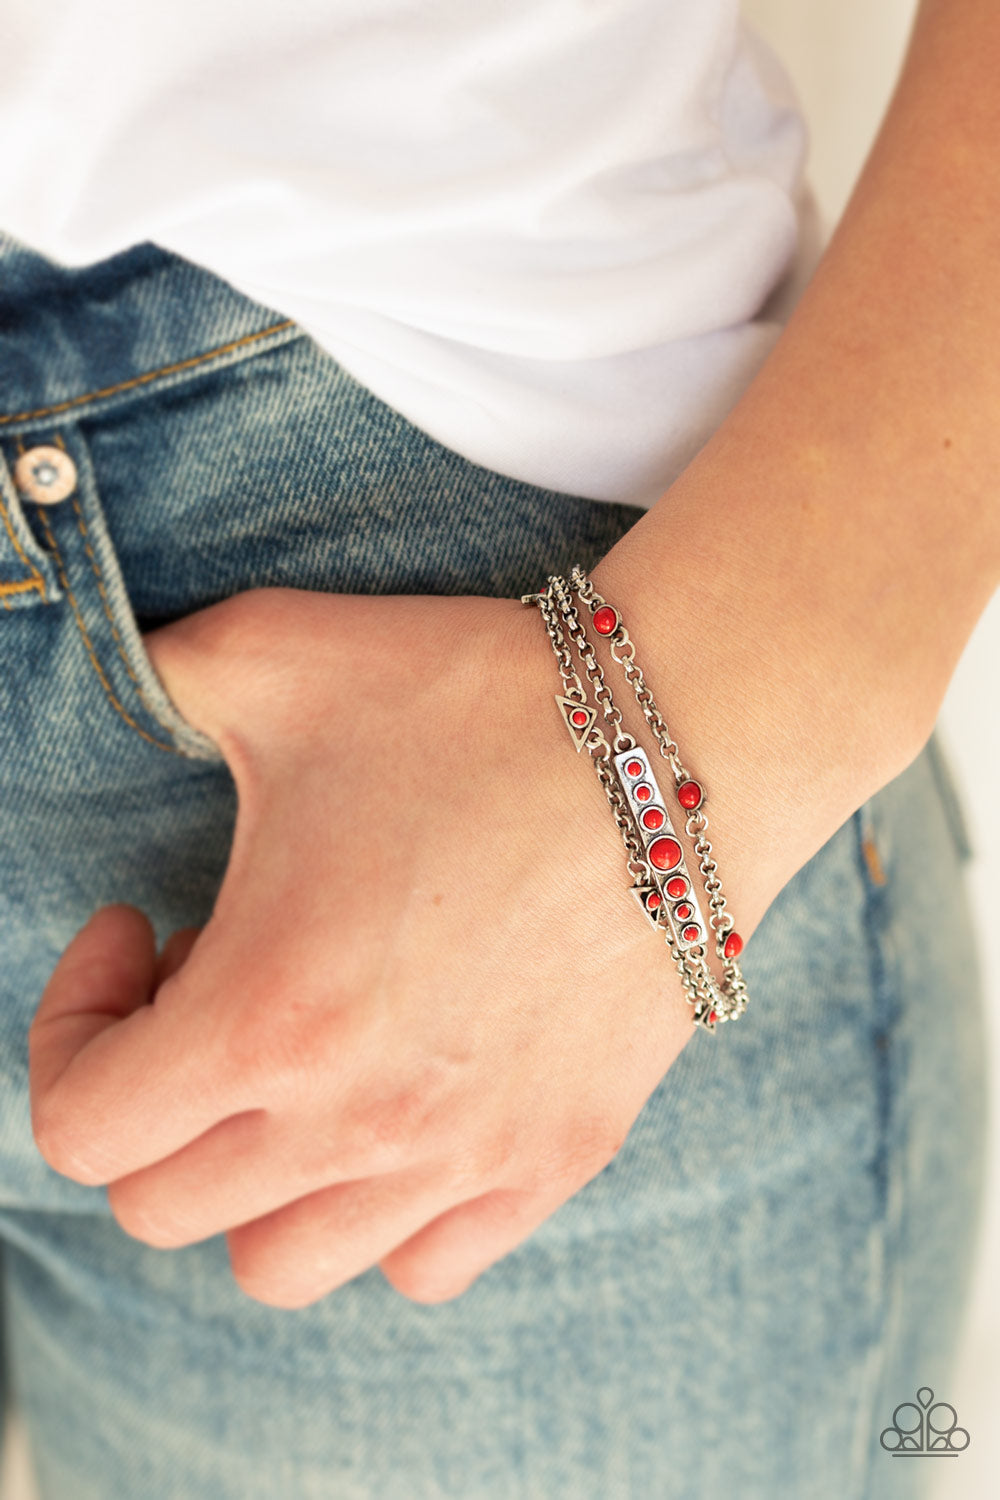 Paparazzi No Means NOMAD - Red - Shimmery Silver Chains - Bracelet - $5 Jewelry with Ashley Swint